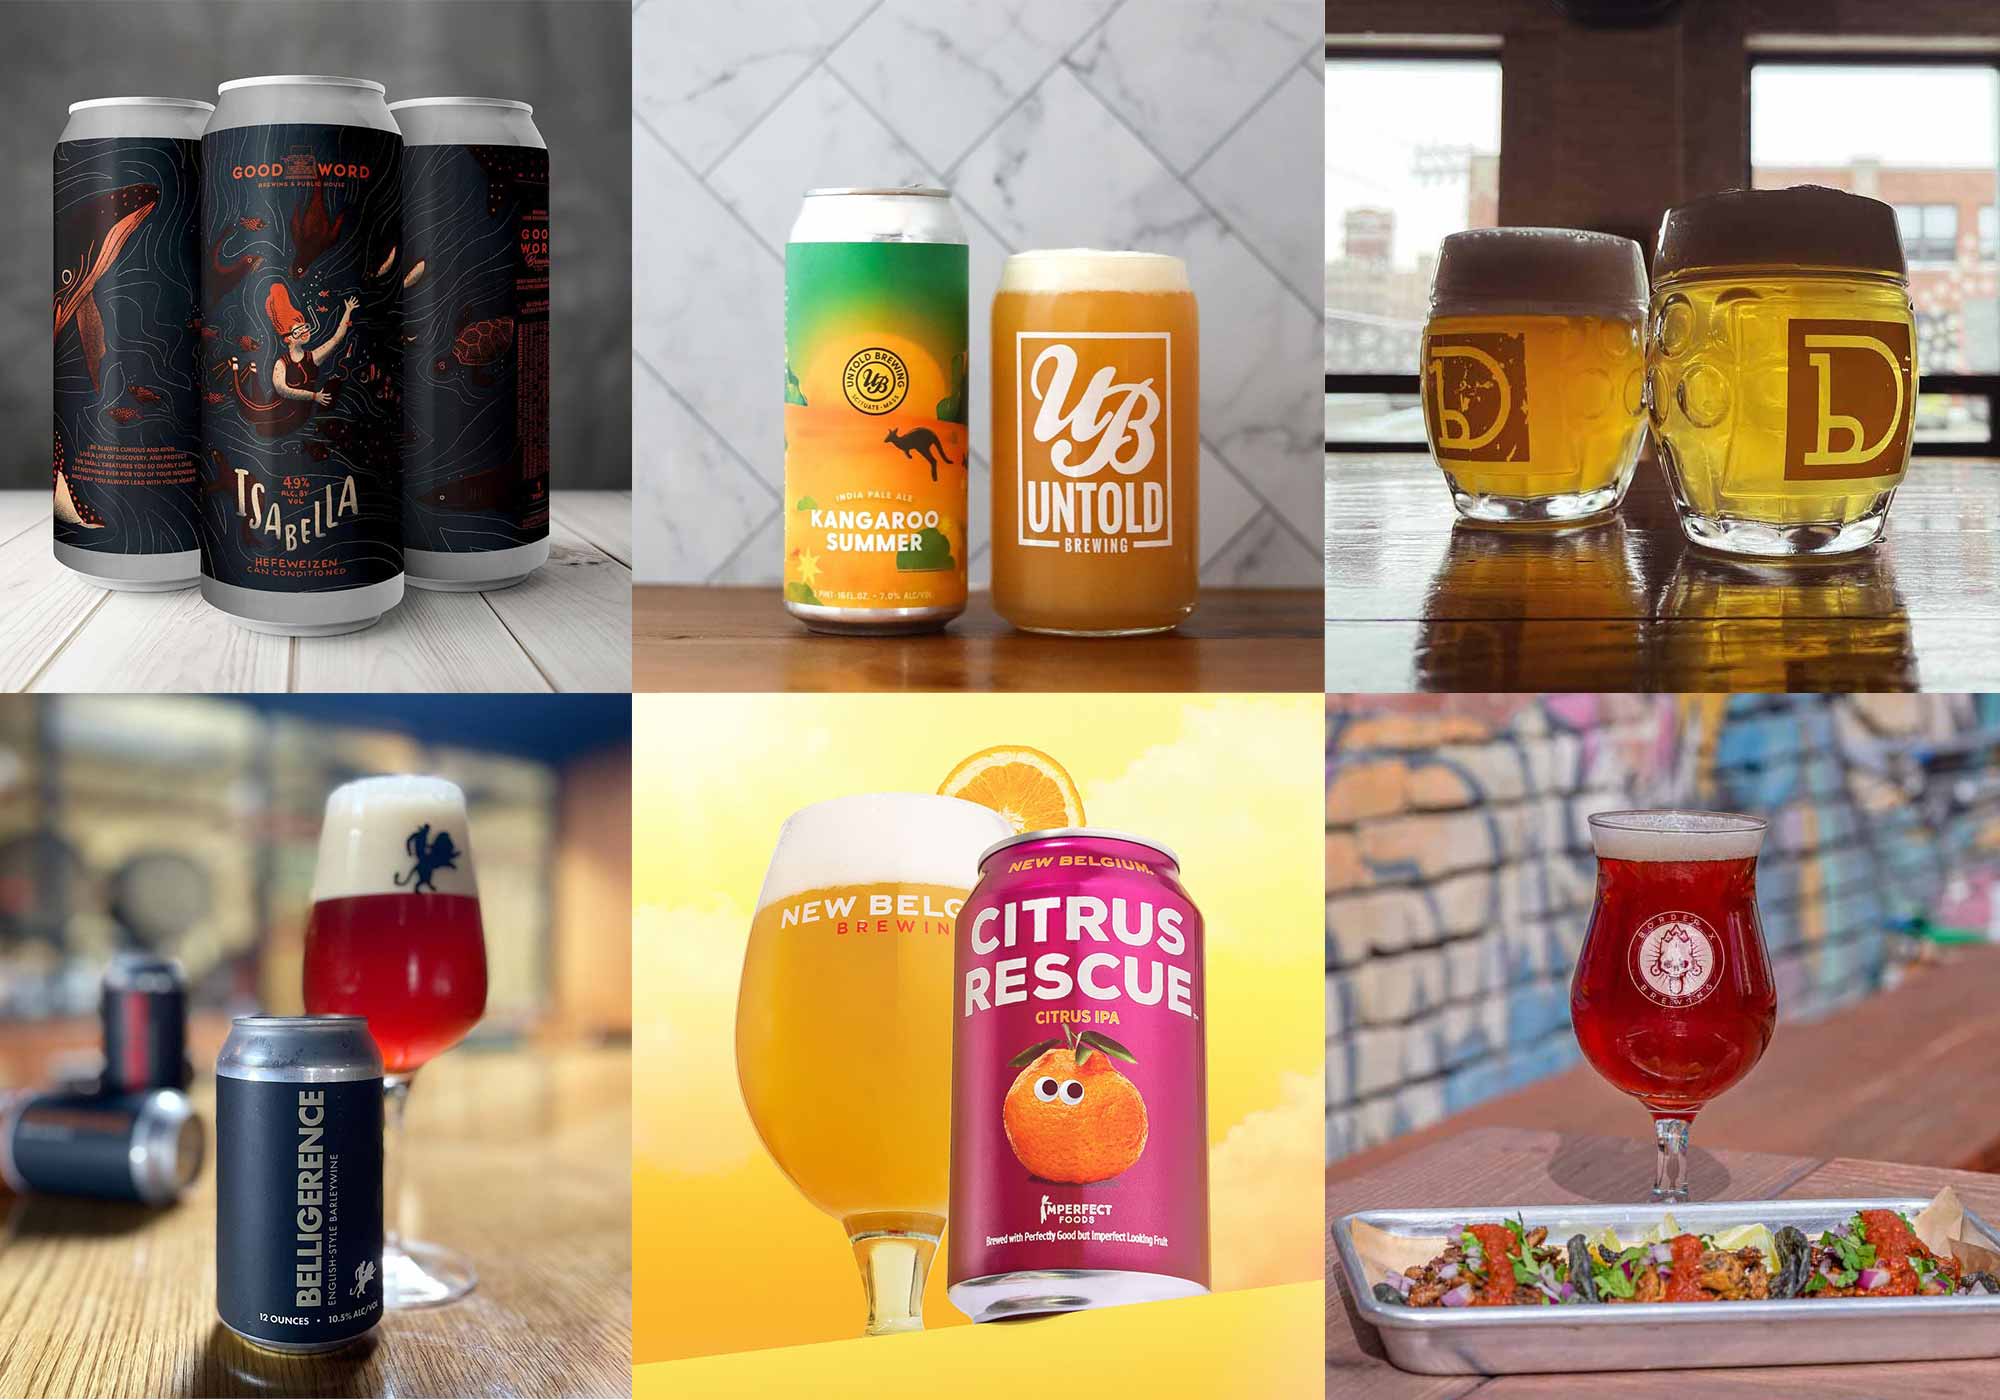 The Top 10 Beers We Drank in February